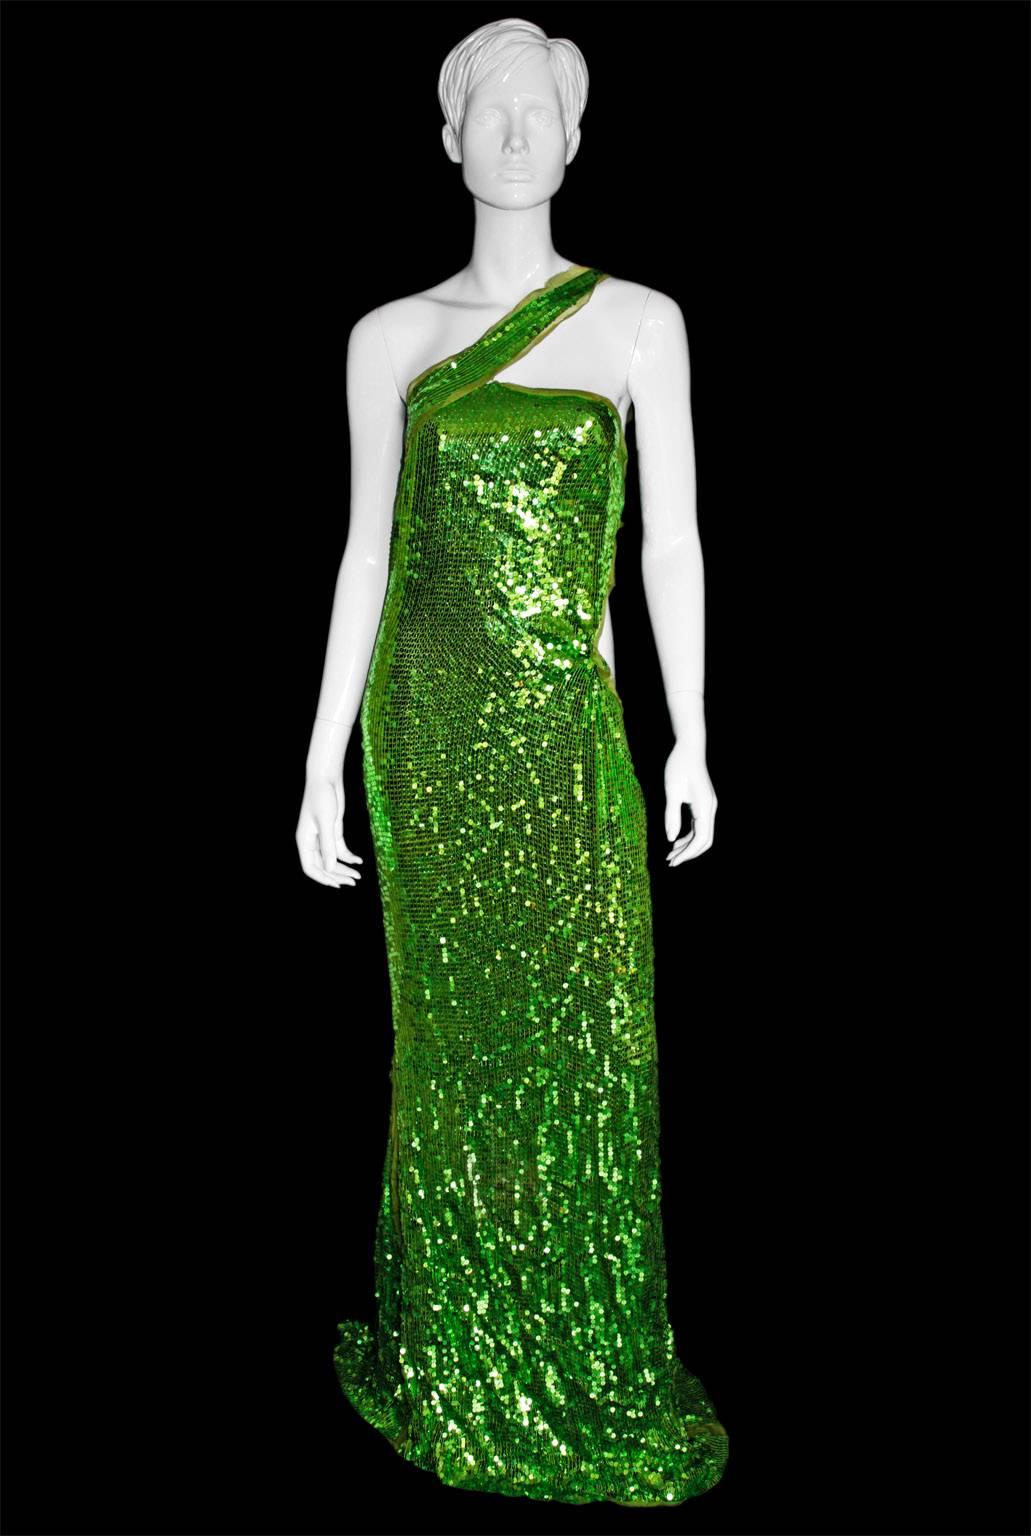 Who could ever forget those incredible sequin gowns from Tom Ford's final truly unforgettable collection for Gucci, in 2004? There were three of these gowns in total... this absolutely jaw-dropping poison green gown & the long-sleeved & sleeveless